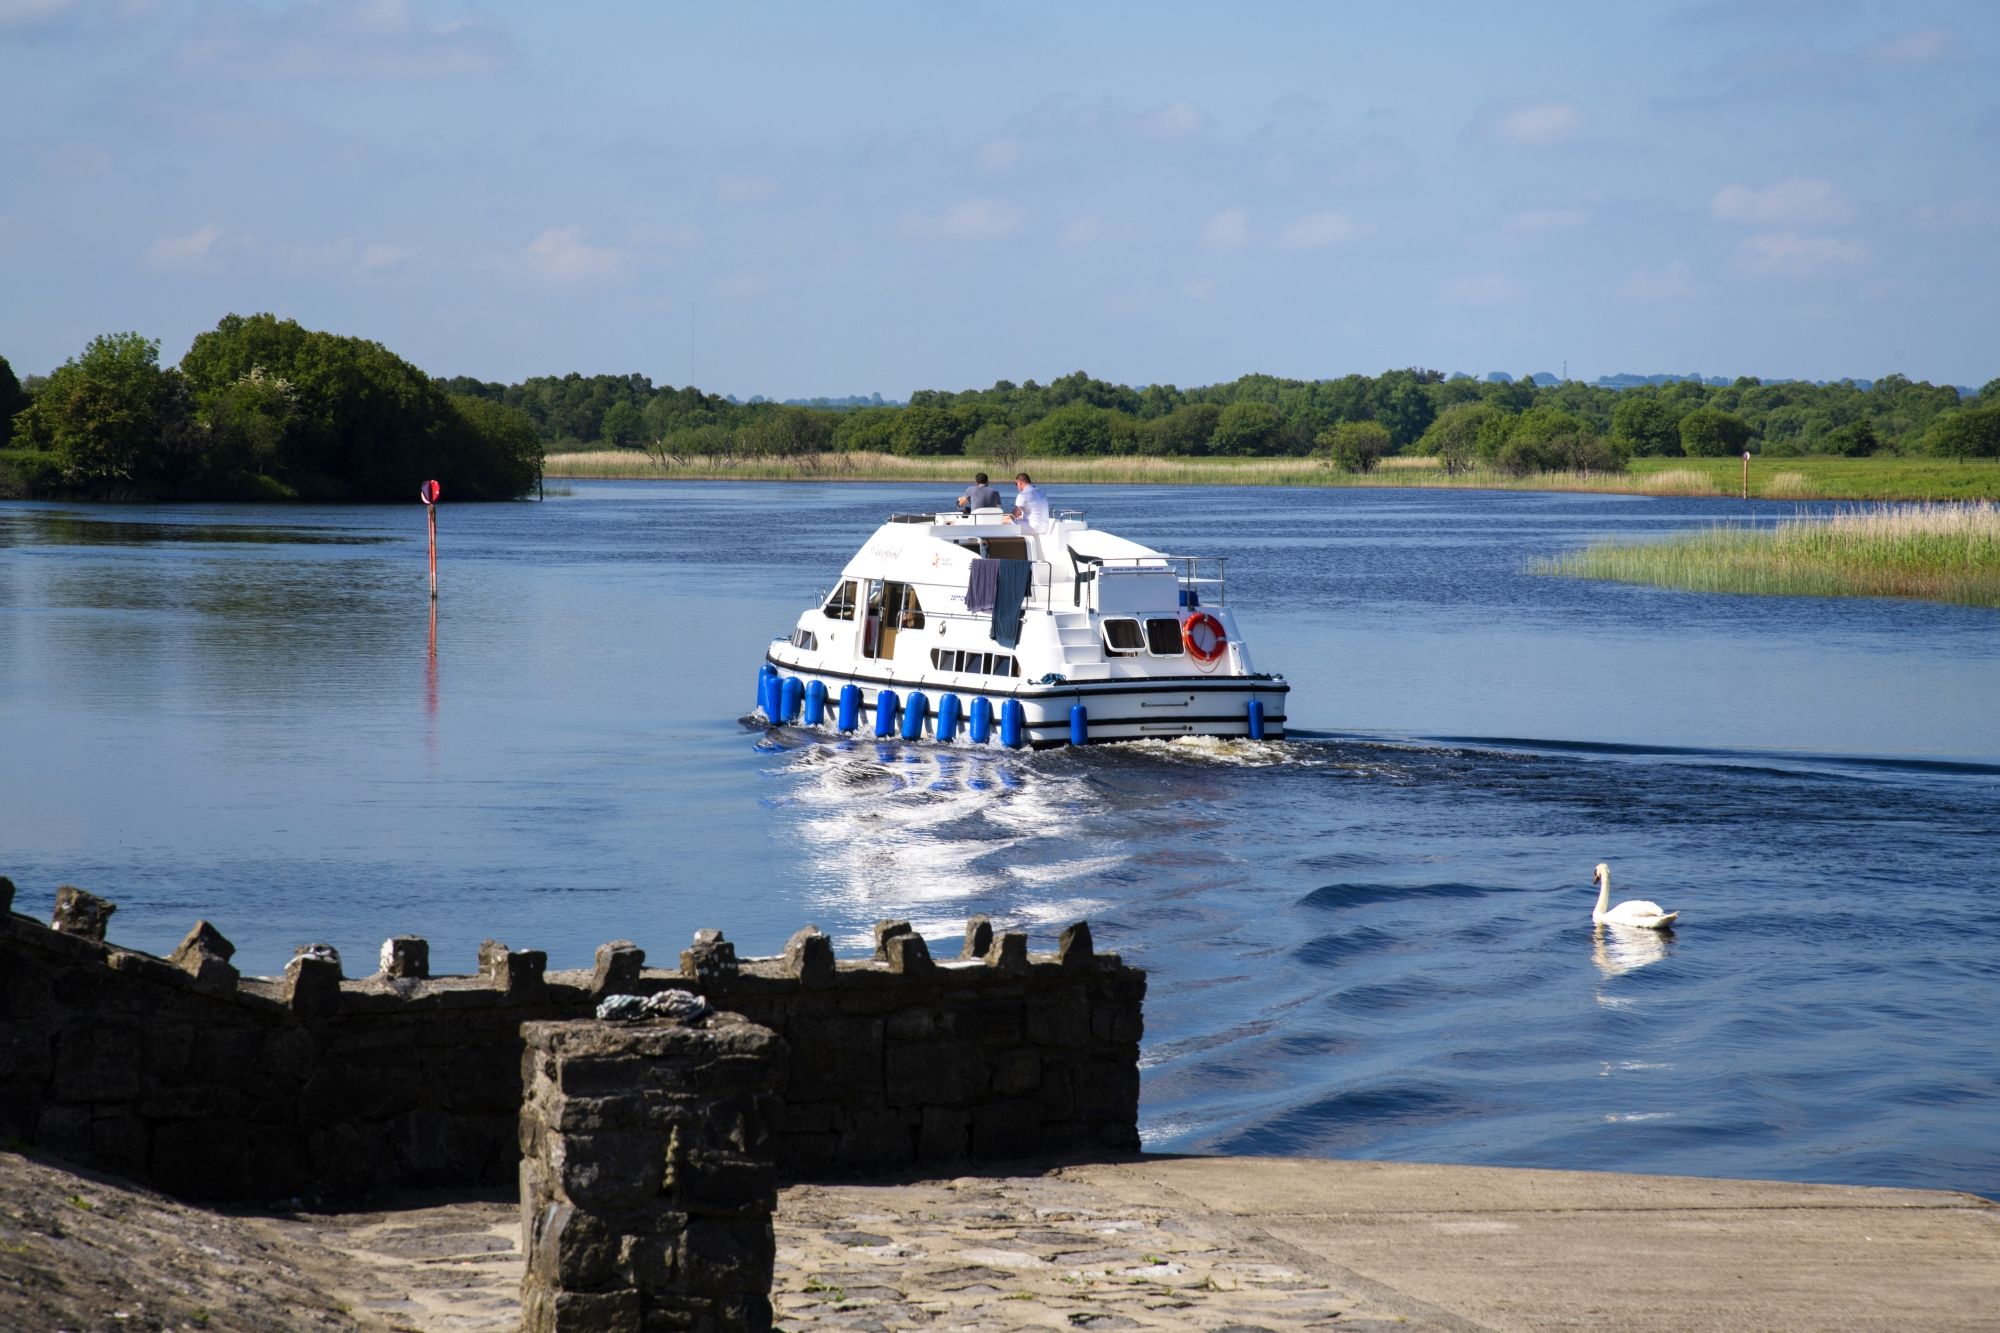 Ahoy there! Holidaying on the river this Summer? Why not take a break from being captain of the ship, round up the crew enjoy 2½ hours of fun activities at Shannon River Adventure.

<img class="alignnone wp-image-2780 size-medium" src="https://www.shannonriveradventure.com/wp-content/uploads/2021/01/Climbing_wall-1-300x225.jpg" alt="" width="300" height="225" /> <img class="alignnone wp-image-2781 size-medium" src="https://www.shannonriveradventure.com/wp-content/uploads/2021/01/Archery-3-300x226.jpg" alt="" width="300" height="226" />

Tie up the boat at Rooskey or Dromod harbour and we'll collect you all in our mini bus for free. When you're done, and had a hot shower, we'll drop you back to continue on your journey.

<img class="alignnone wp-image-2776" src="https://www.shannonriveradventure.com/wp-content/uploads/2021/01/Mudslide-1-300x285.jpg" alt="" width="200" height="190" /> <img class="alignnone wp-image-2782" src="https://www.shannonriveradventure.com/wp-content/uploads/2021/01/PierJumping-300x281.jpg" alt="" width="200" height="187" /> <img class="alignnone wp-image-2778" src="https://www.shannonriveradventure.com/wp-content/uploads/2021/01/Kayaking-4-300x284.jpg" alt="" width="200" height="189" />
<div class="tm-grid-expand uk-grid-margin uk-grid uk-grid-stack">
<div class="uk-width-2-3@m uk-grid-margin uk-first-column">
<div class="uk-panel uk-text-lead uk-margin" data-id="page#1-1-1-1">
<div class="tm-grid-expand uk-grid-margin uk-grid uk-grid-stack">
<div class="uk-width-2-3@m uk-grid-margin uk-first-column">
<div class="uk-panel uk-text-lead uk-margin" data-id="page#1-1-1-1">
<h3>CHOOSE THE PERFECT PACKAGE</h3>
</div>
</div>
</div>
<div class="tm-grid-expand uk-child-width-1-1 uk-grid-margin uk-grid uk-grid-stack">
<div class="uk-first-column">
<div class="uk-card uk-card-hover uk-card-small uk-card-body uk-margin-remove-first-child uk-margin" data-id="page#1-2-0-0">
<div class="el-content uk-panel uk-margin-top">
<h5><strong>DURING YOUR 2½ HOURS YOU CAN CHOOSE 3 ACTIVITIES:</strong></h5>
<strong>3 Water</strong> – Kayaking, Mud Slide & Pier Jumping

<strong>1 Water & 2 Land</strong> – Kayaking, Climbing Wall & Archery

<strong>Kayak Trip</strong> – Accompanied trip around surrounding lakes of Loughs Bofin & Boderg

<strong>PRICING: </strong>

Adults:      €50.00   (Children over 18!)

Children:  €40.00   (Children under 18)

<span style="text-decoration: underline;">Family Bundle:</span> Adults €50.00, Children €35.00

</div>
</div>
</div>
</div>
</div>
</div>
</div>
<div>Pick-up included from : <strong>Rooskey</strong> Harbour or <strong>Dromod</strong> Harbour</div>
<h6><em>We provide all equipment required, including wet suits, buoyancy aids, helmets, paddles. </em></h6>